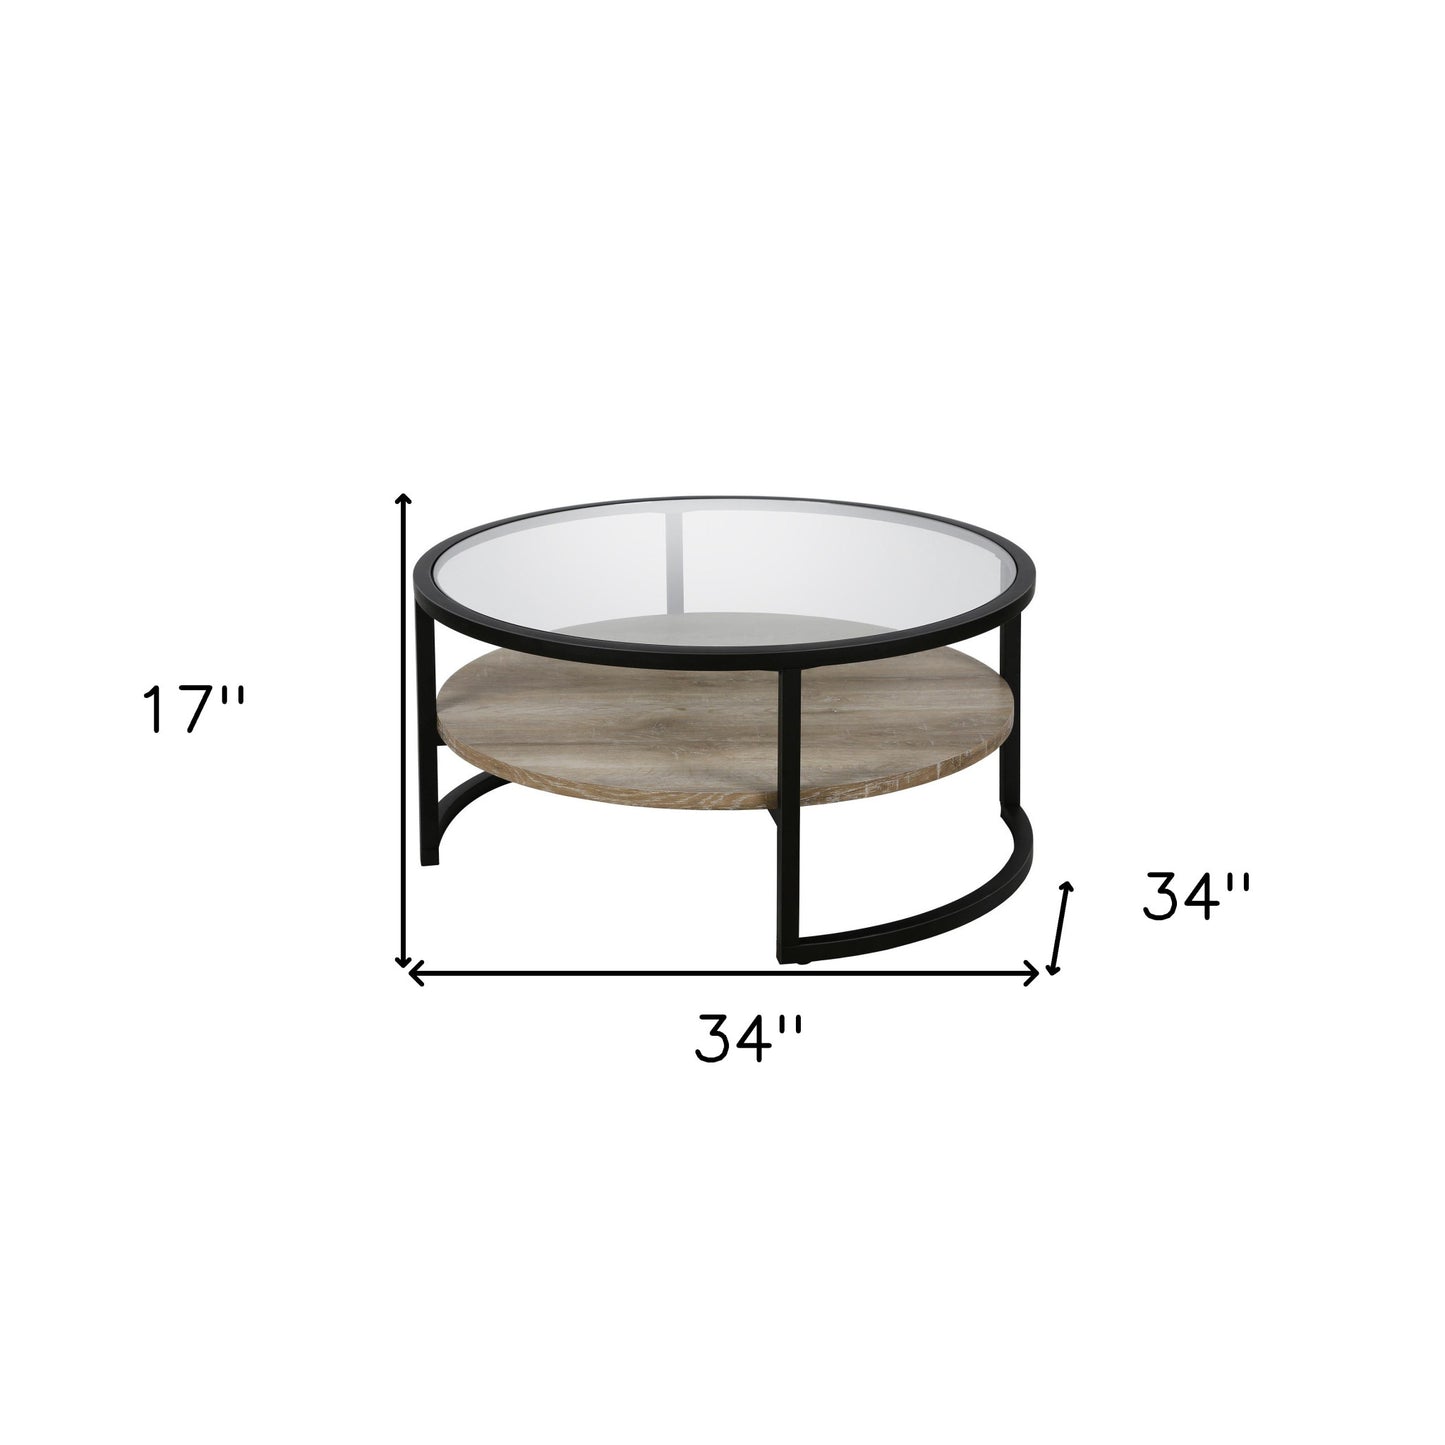 34" Black Glass Round Coffee Table With Shelf By Homeroots